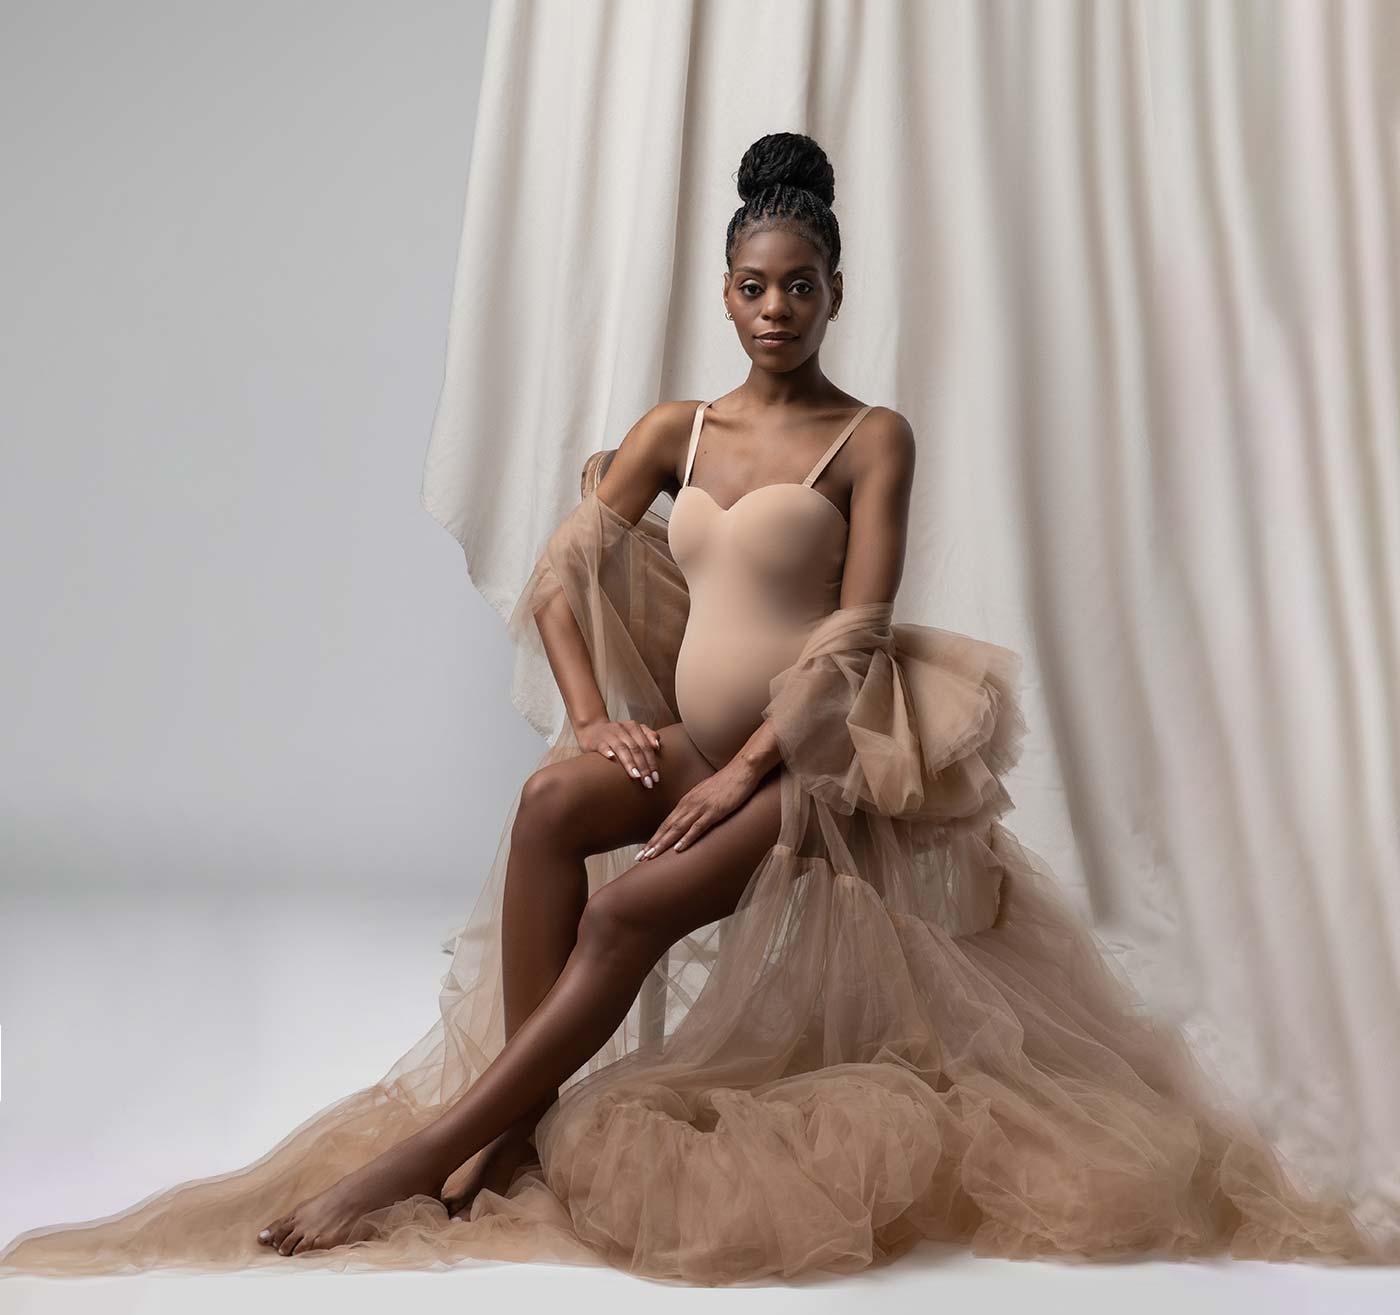 A professional photo of a pregnant woman wearing a long flowing fabric while sitting on a chair. The photo is tastefully lit by a maternity photographer.